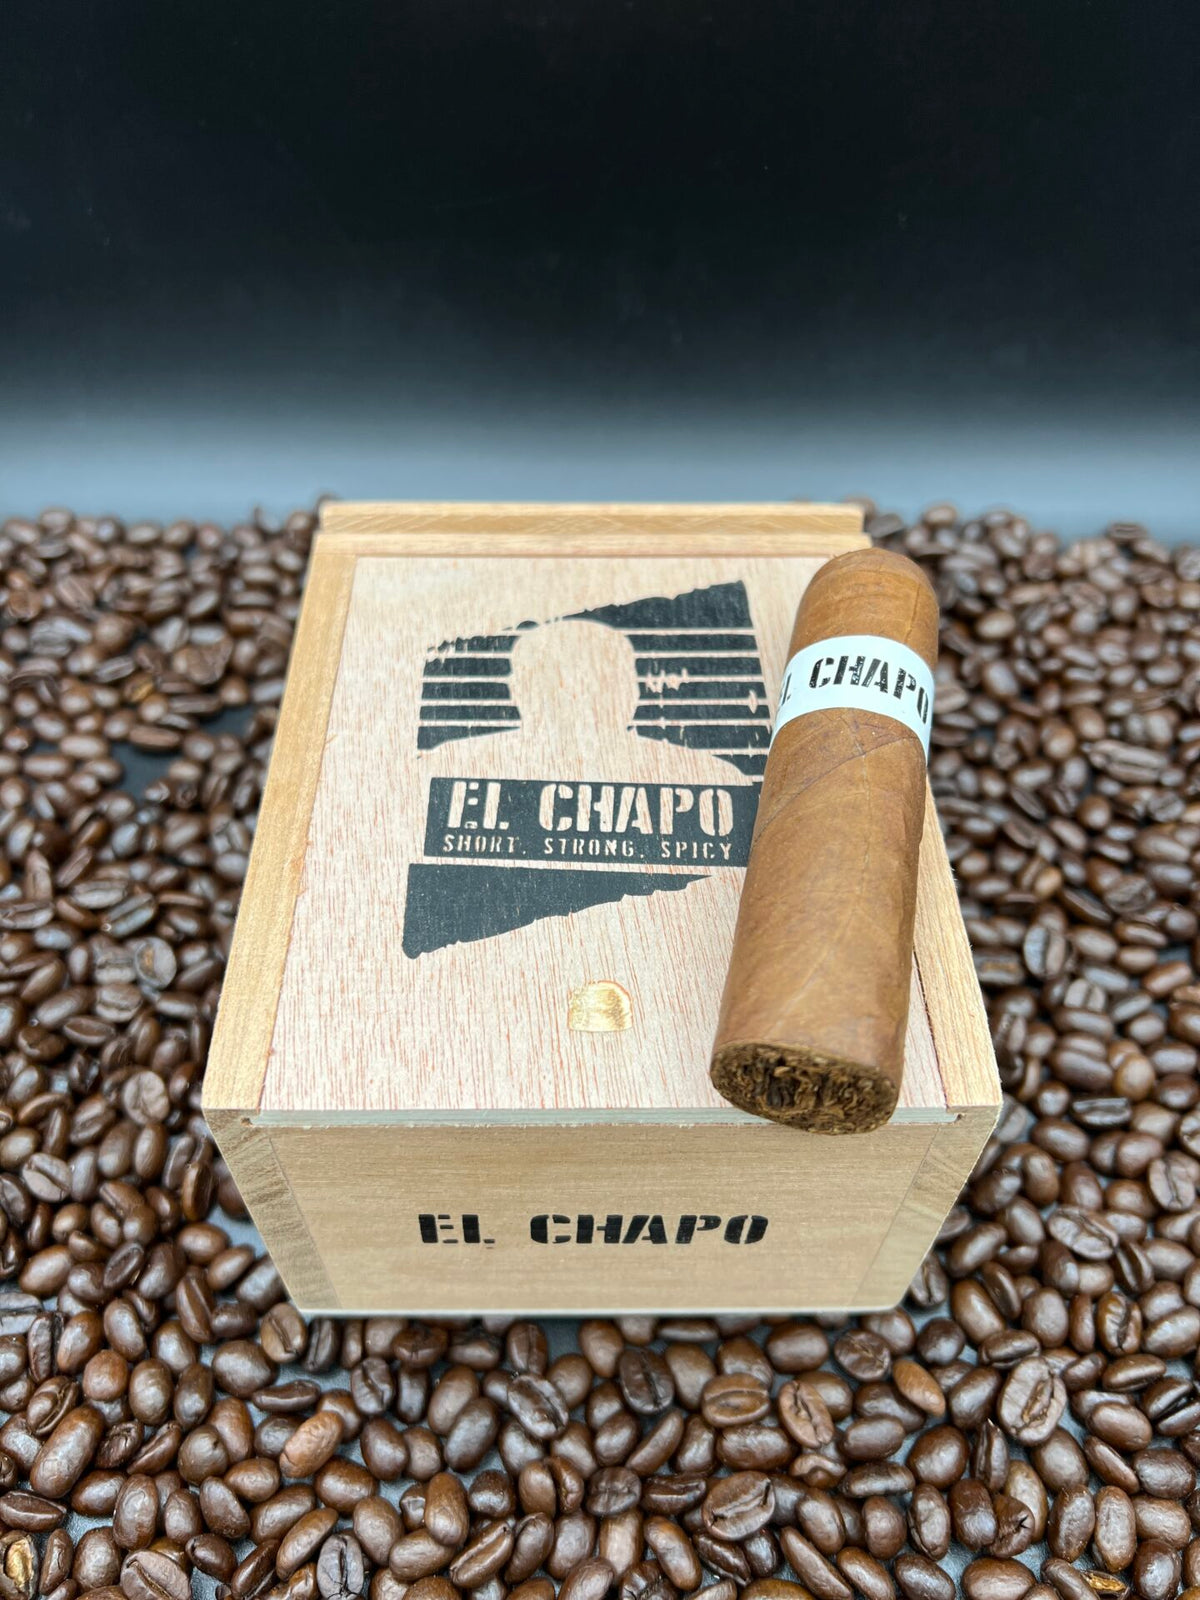 Jeremy Jack - El Chapo cigars supplied by Sir Louis Cigars